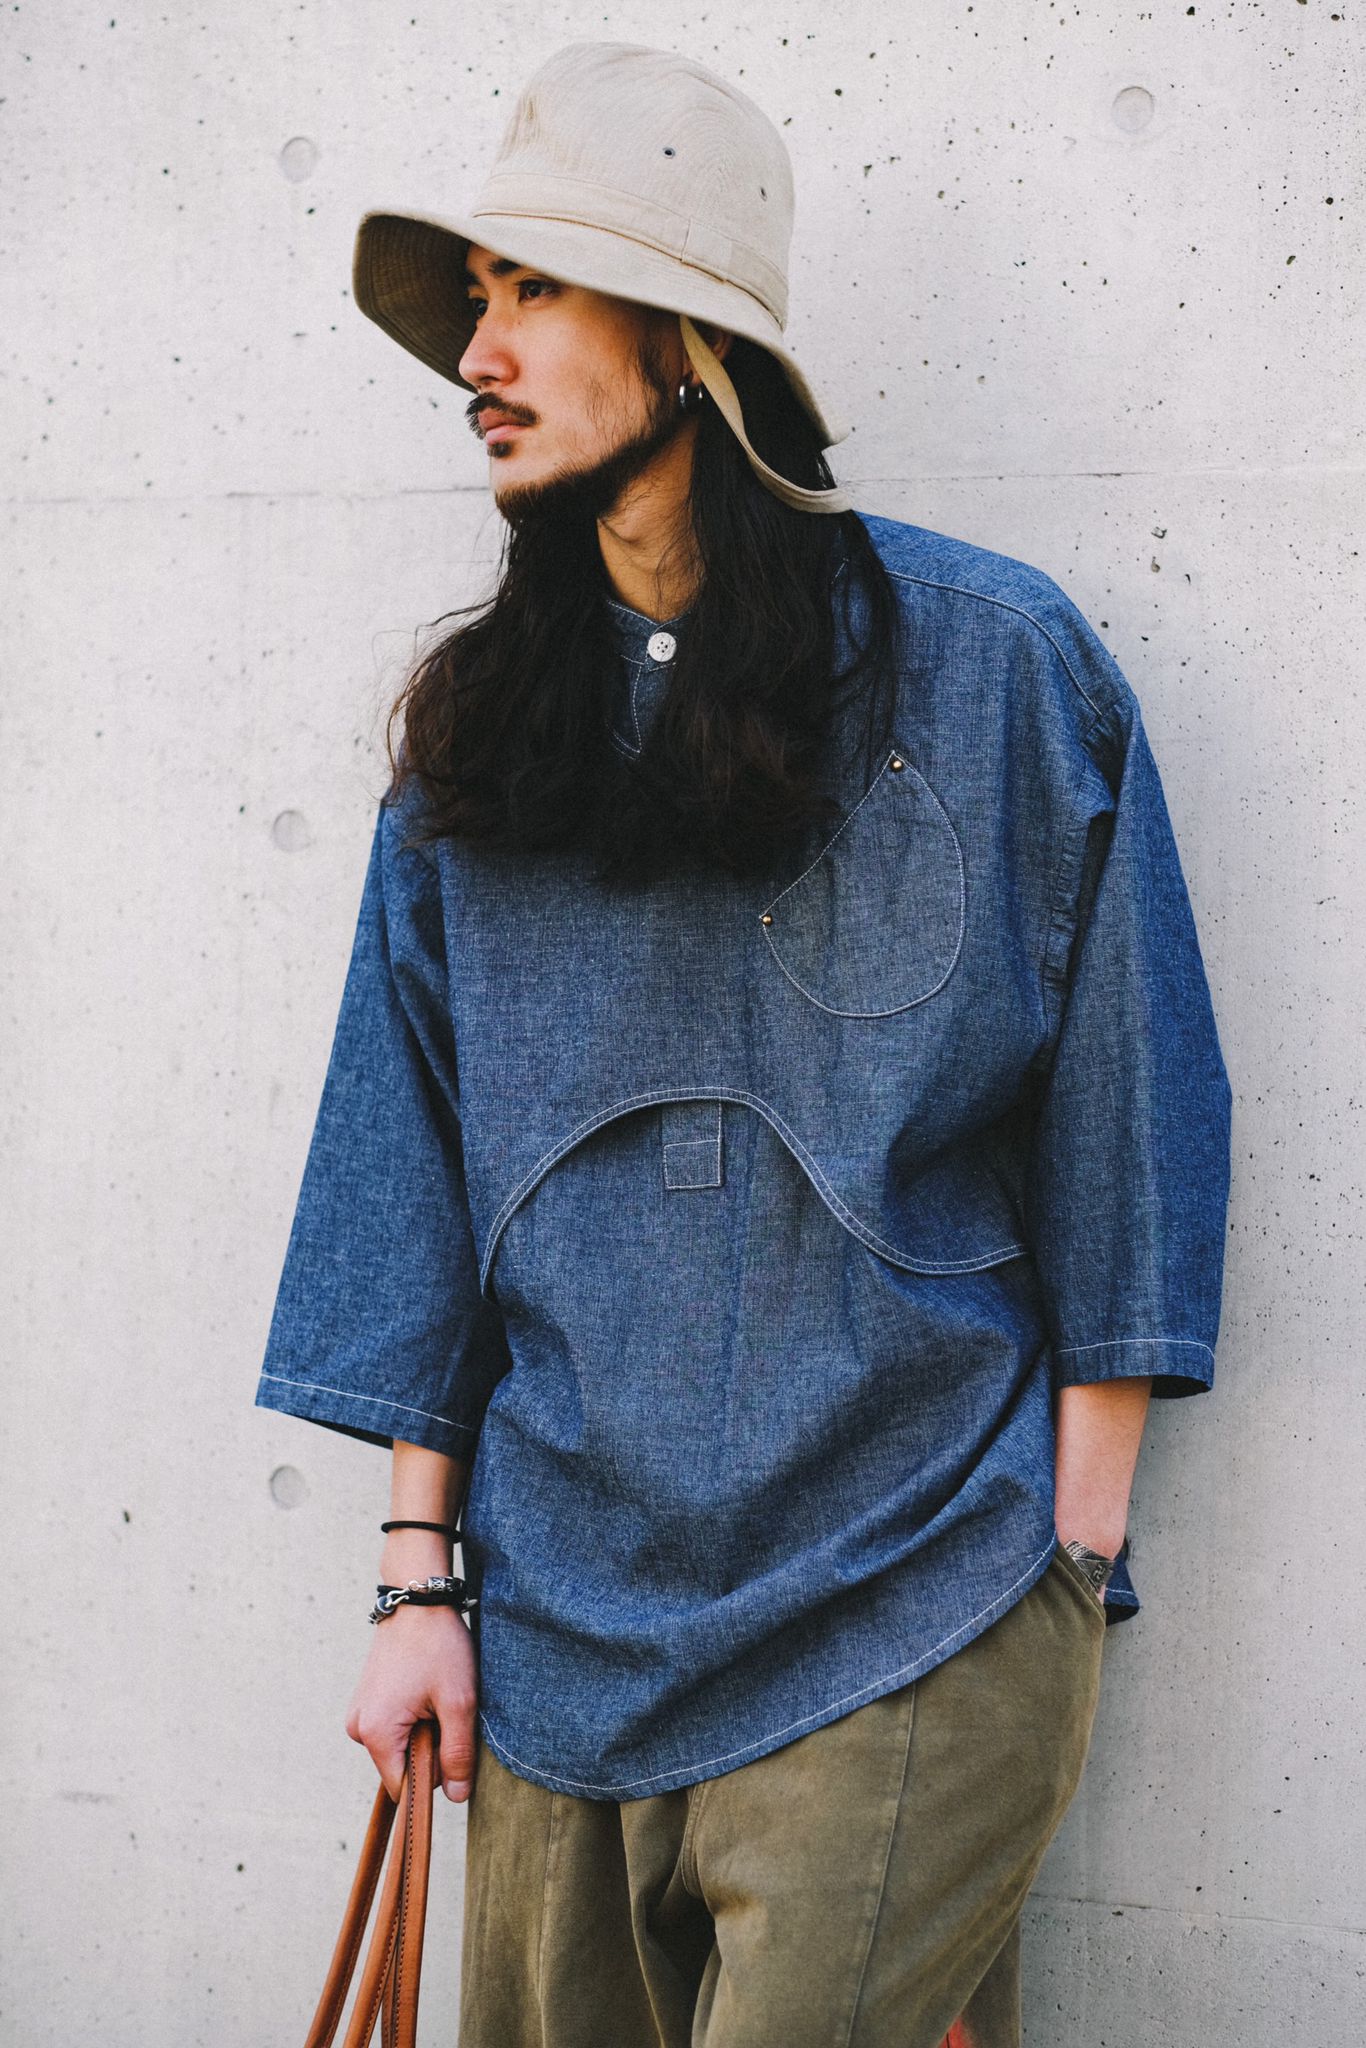 FLTC Two Way Layers Pullover Henry Shirt